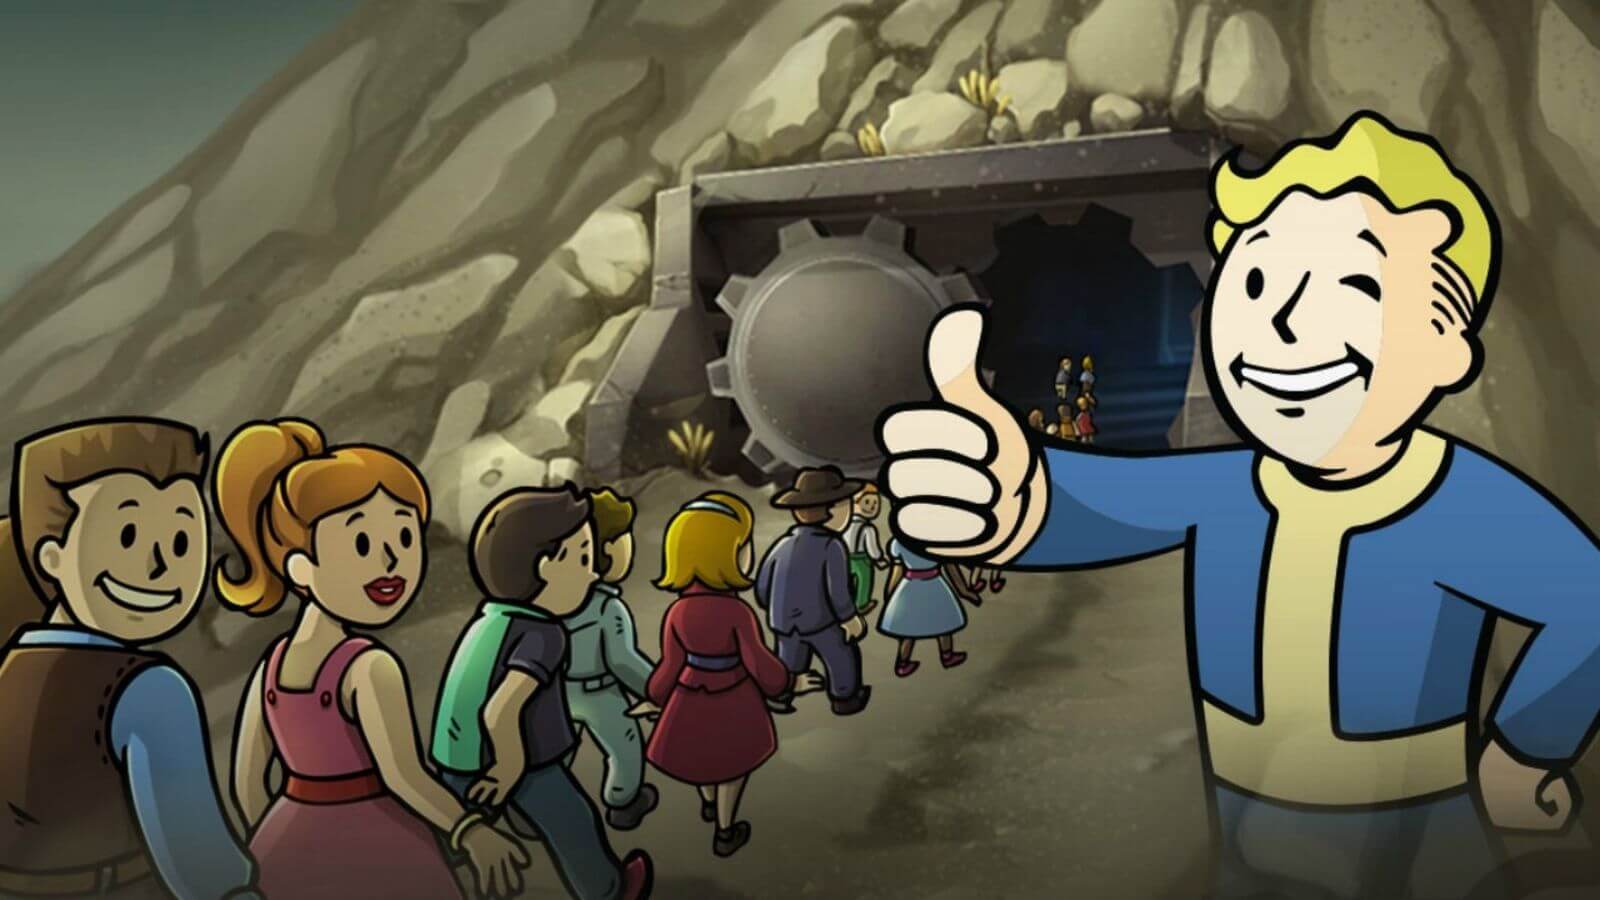 Microtransactions big win: Fallout Shelter still raking in the bottle caps